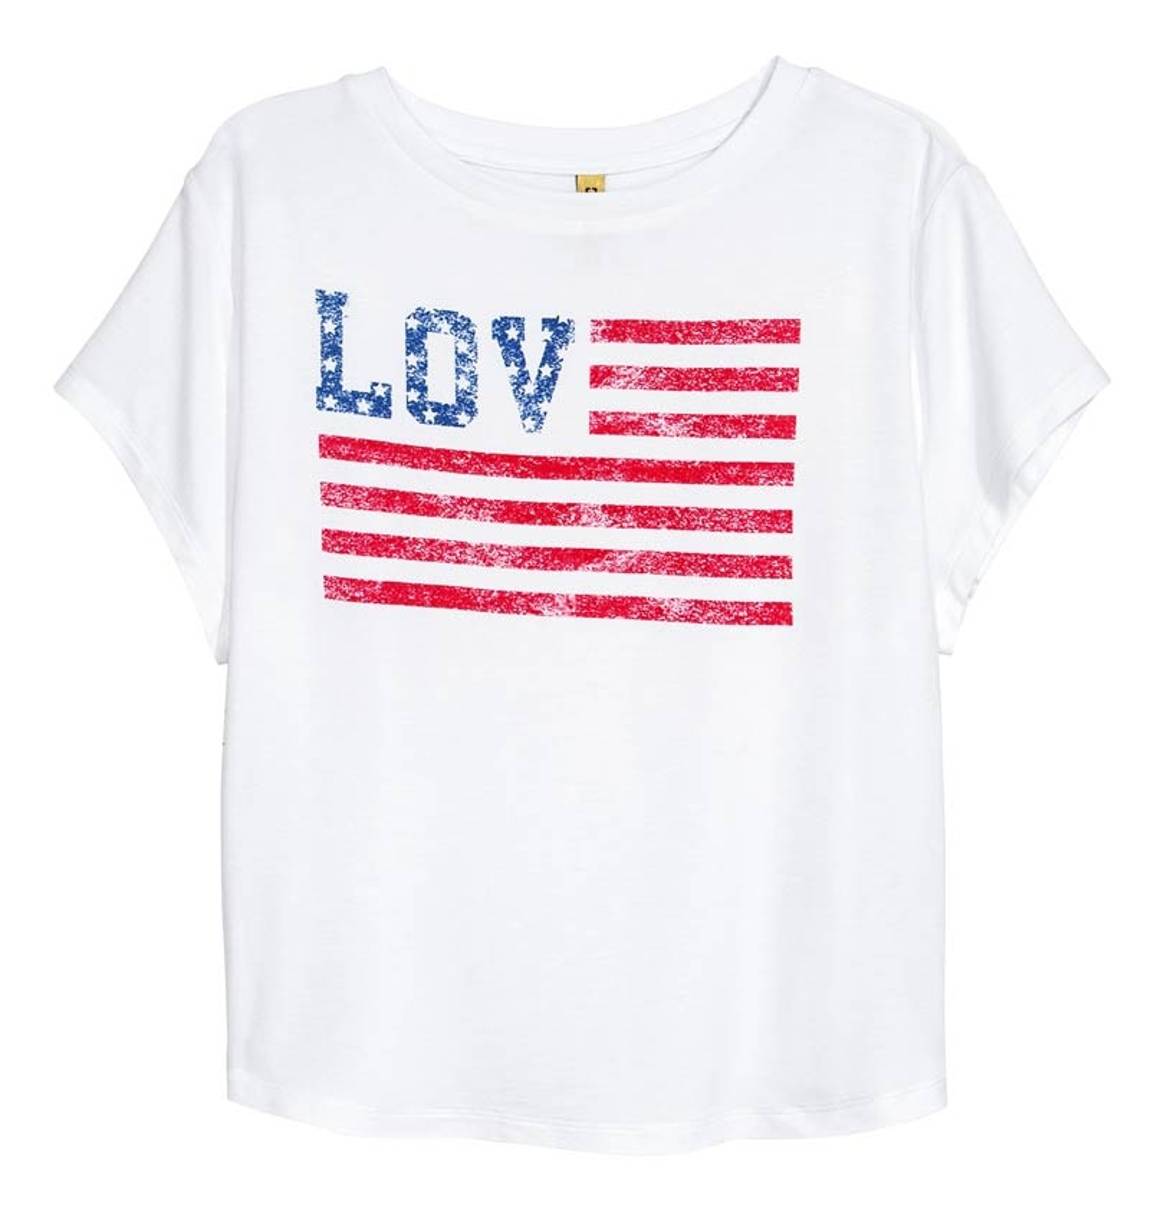 H&M to launch 4th of July and girl empowerment collection